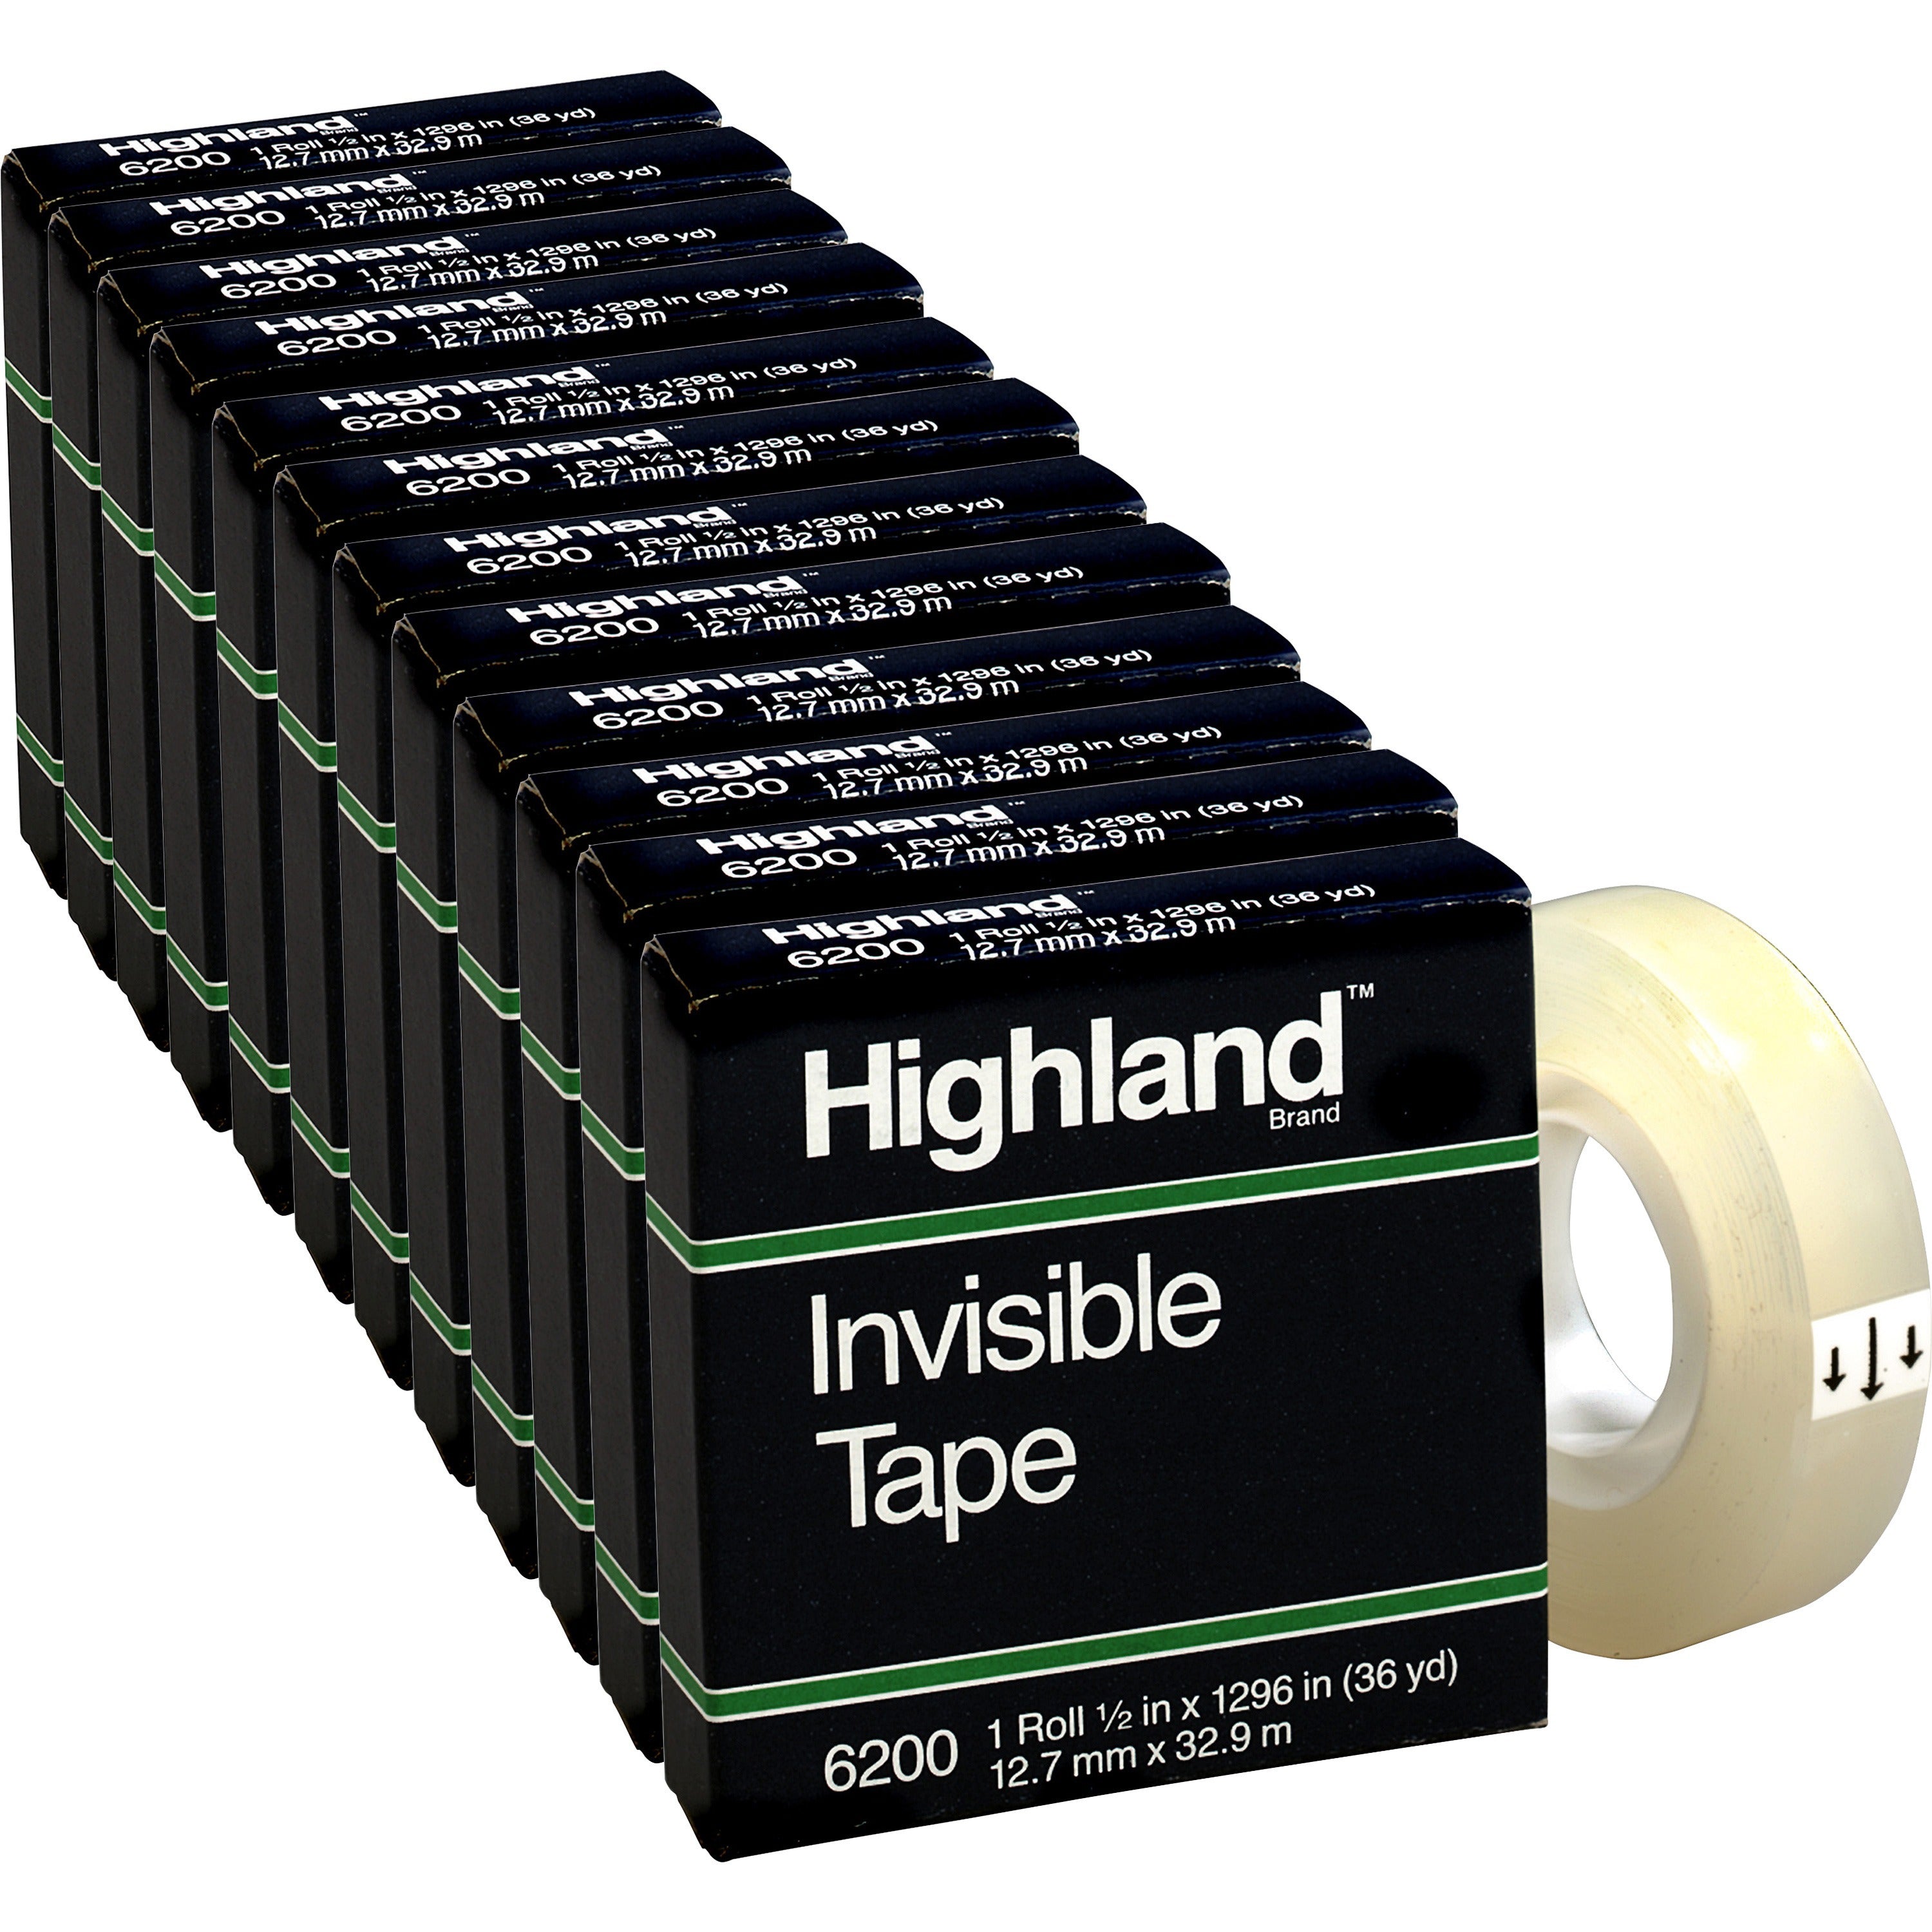 highland-1-2w-matte-finish-invisible-tape-36-yd-length-x-050-width-1-core-for-mending-splicing-holding-12-box-matte-clear_mmm6200121296bx - 1